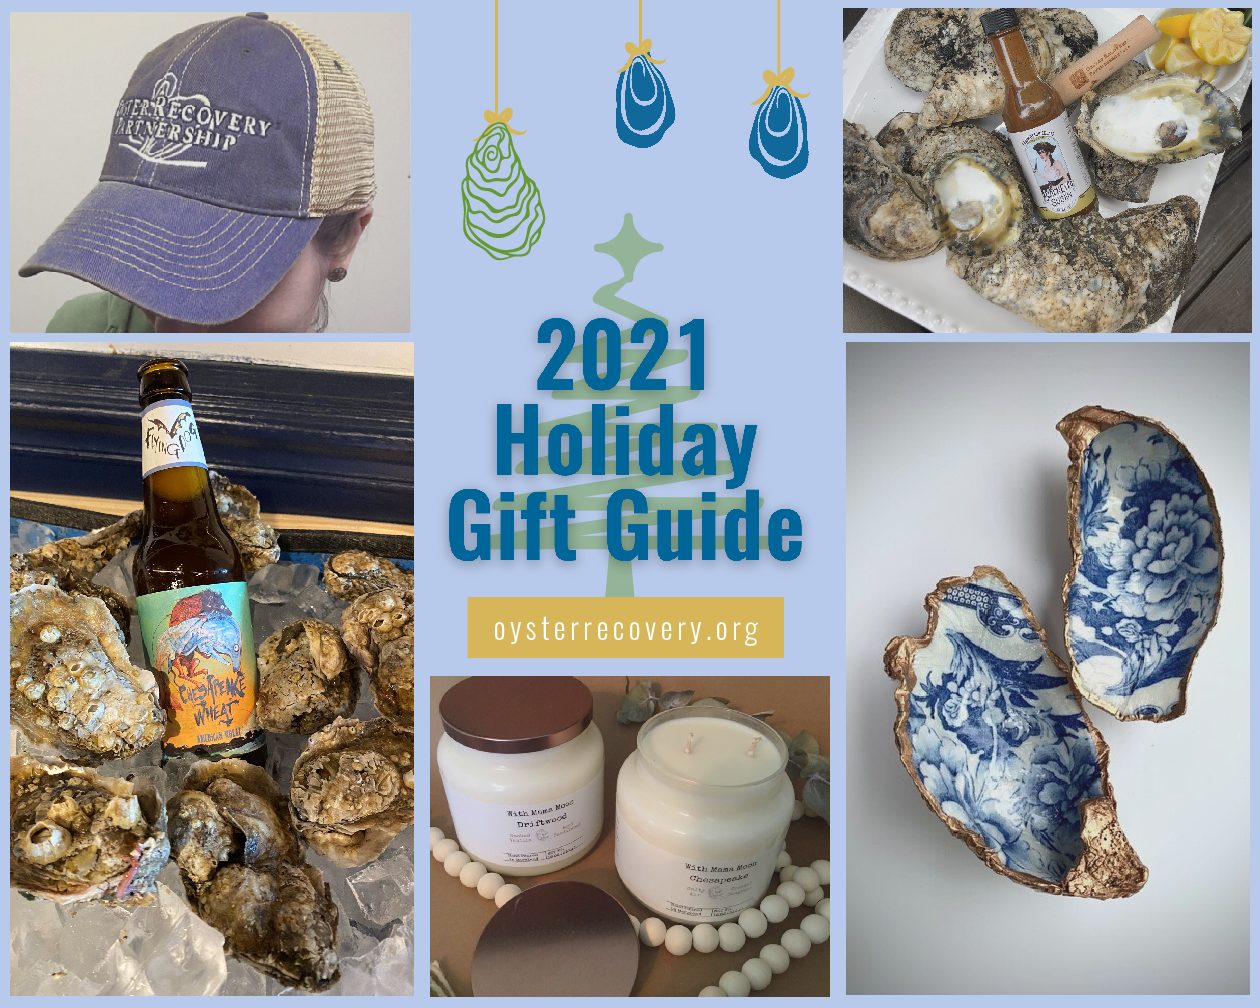 2021 Holiday Gift Guide (2)